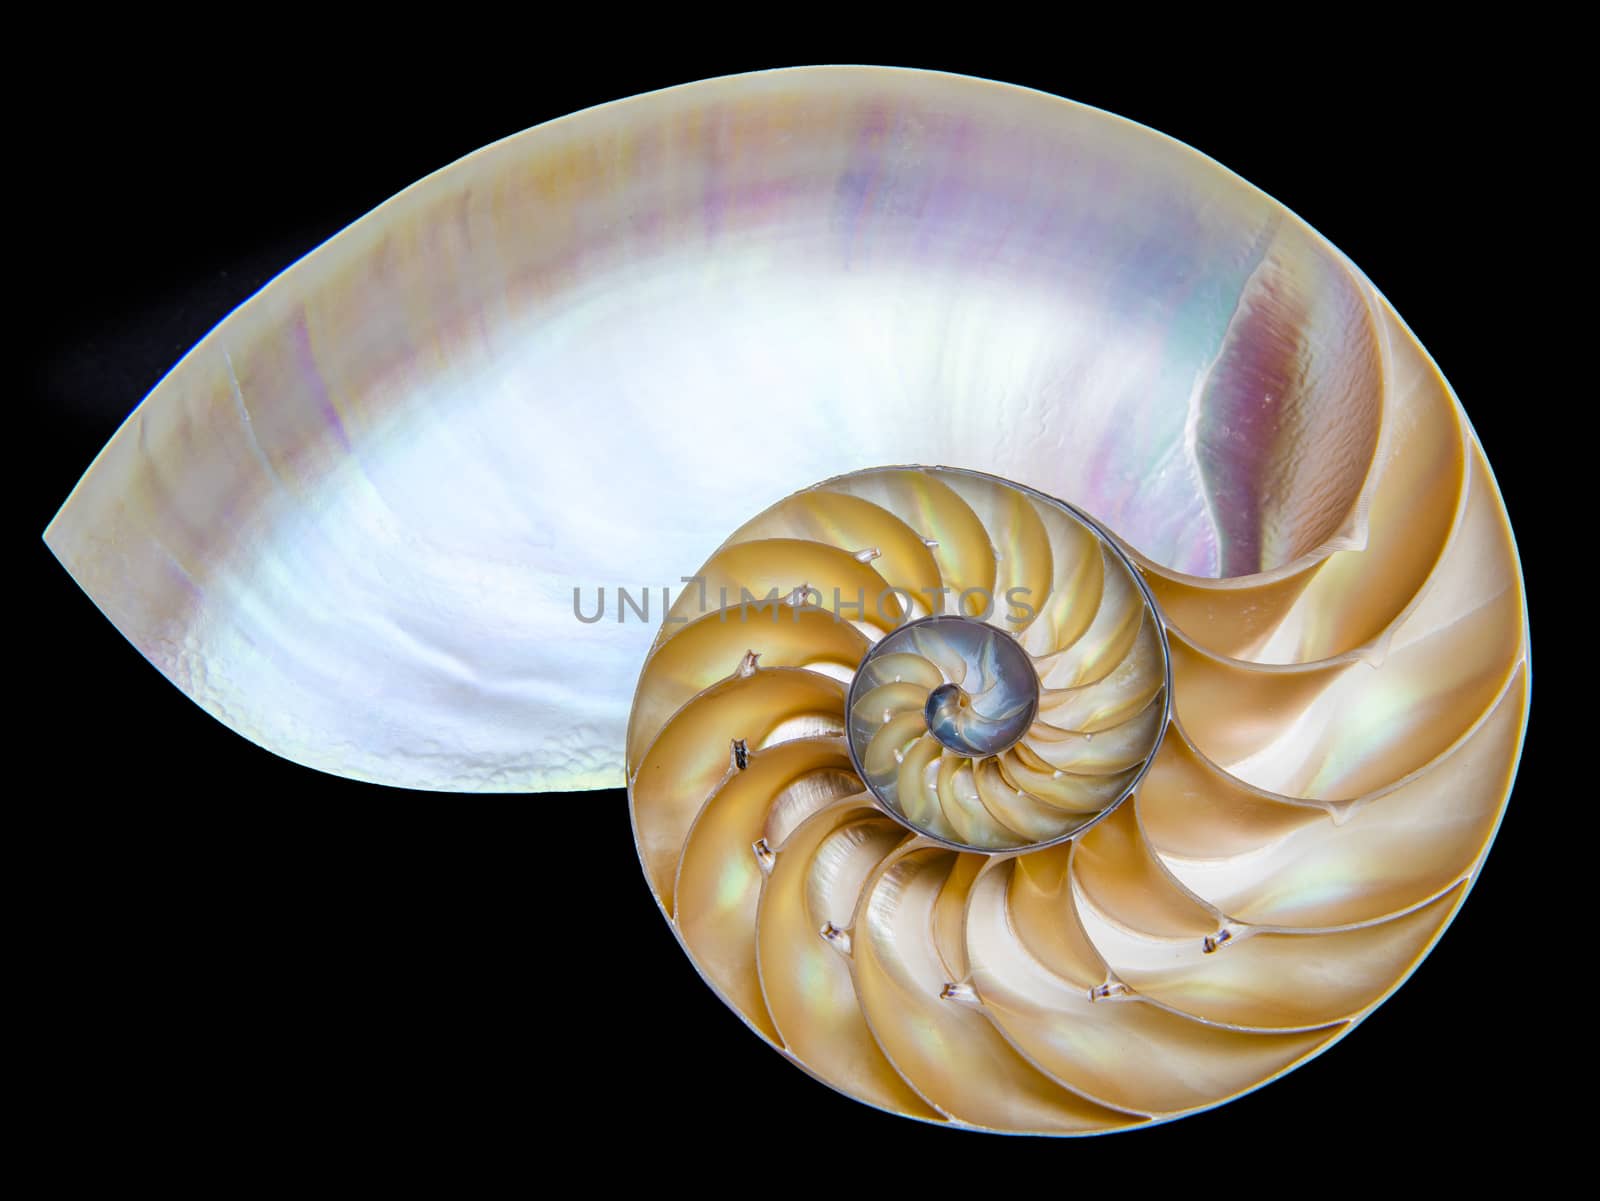 Detailed photo of a halved shell of a chambered nautilus (Nautilus pompilius) shows beautiful spiral pattern. Isolated on black